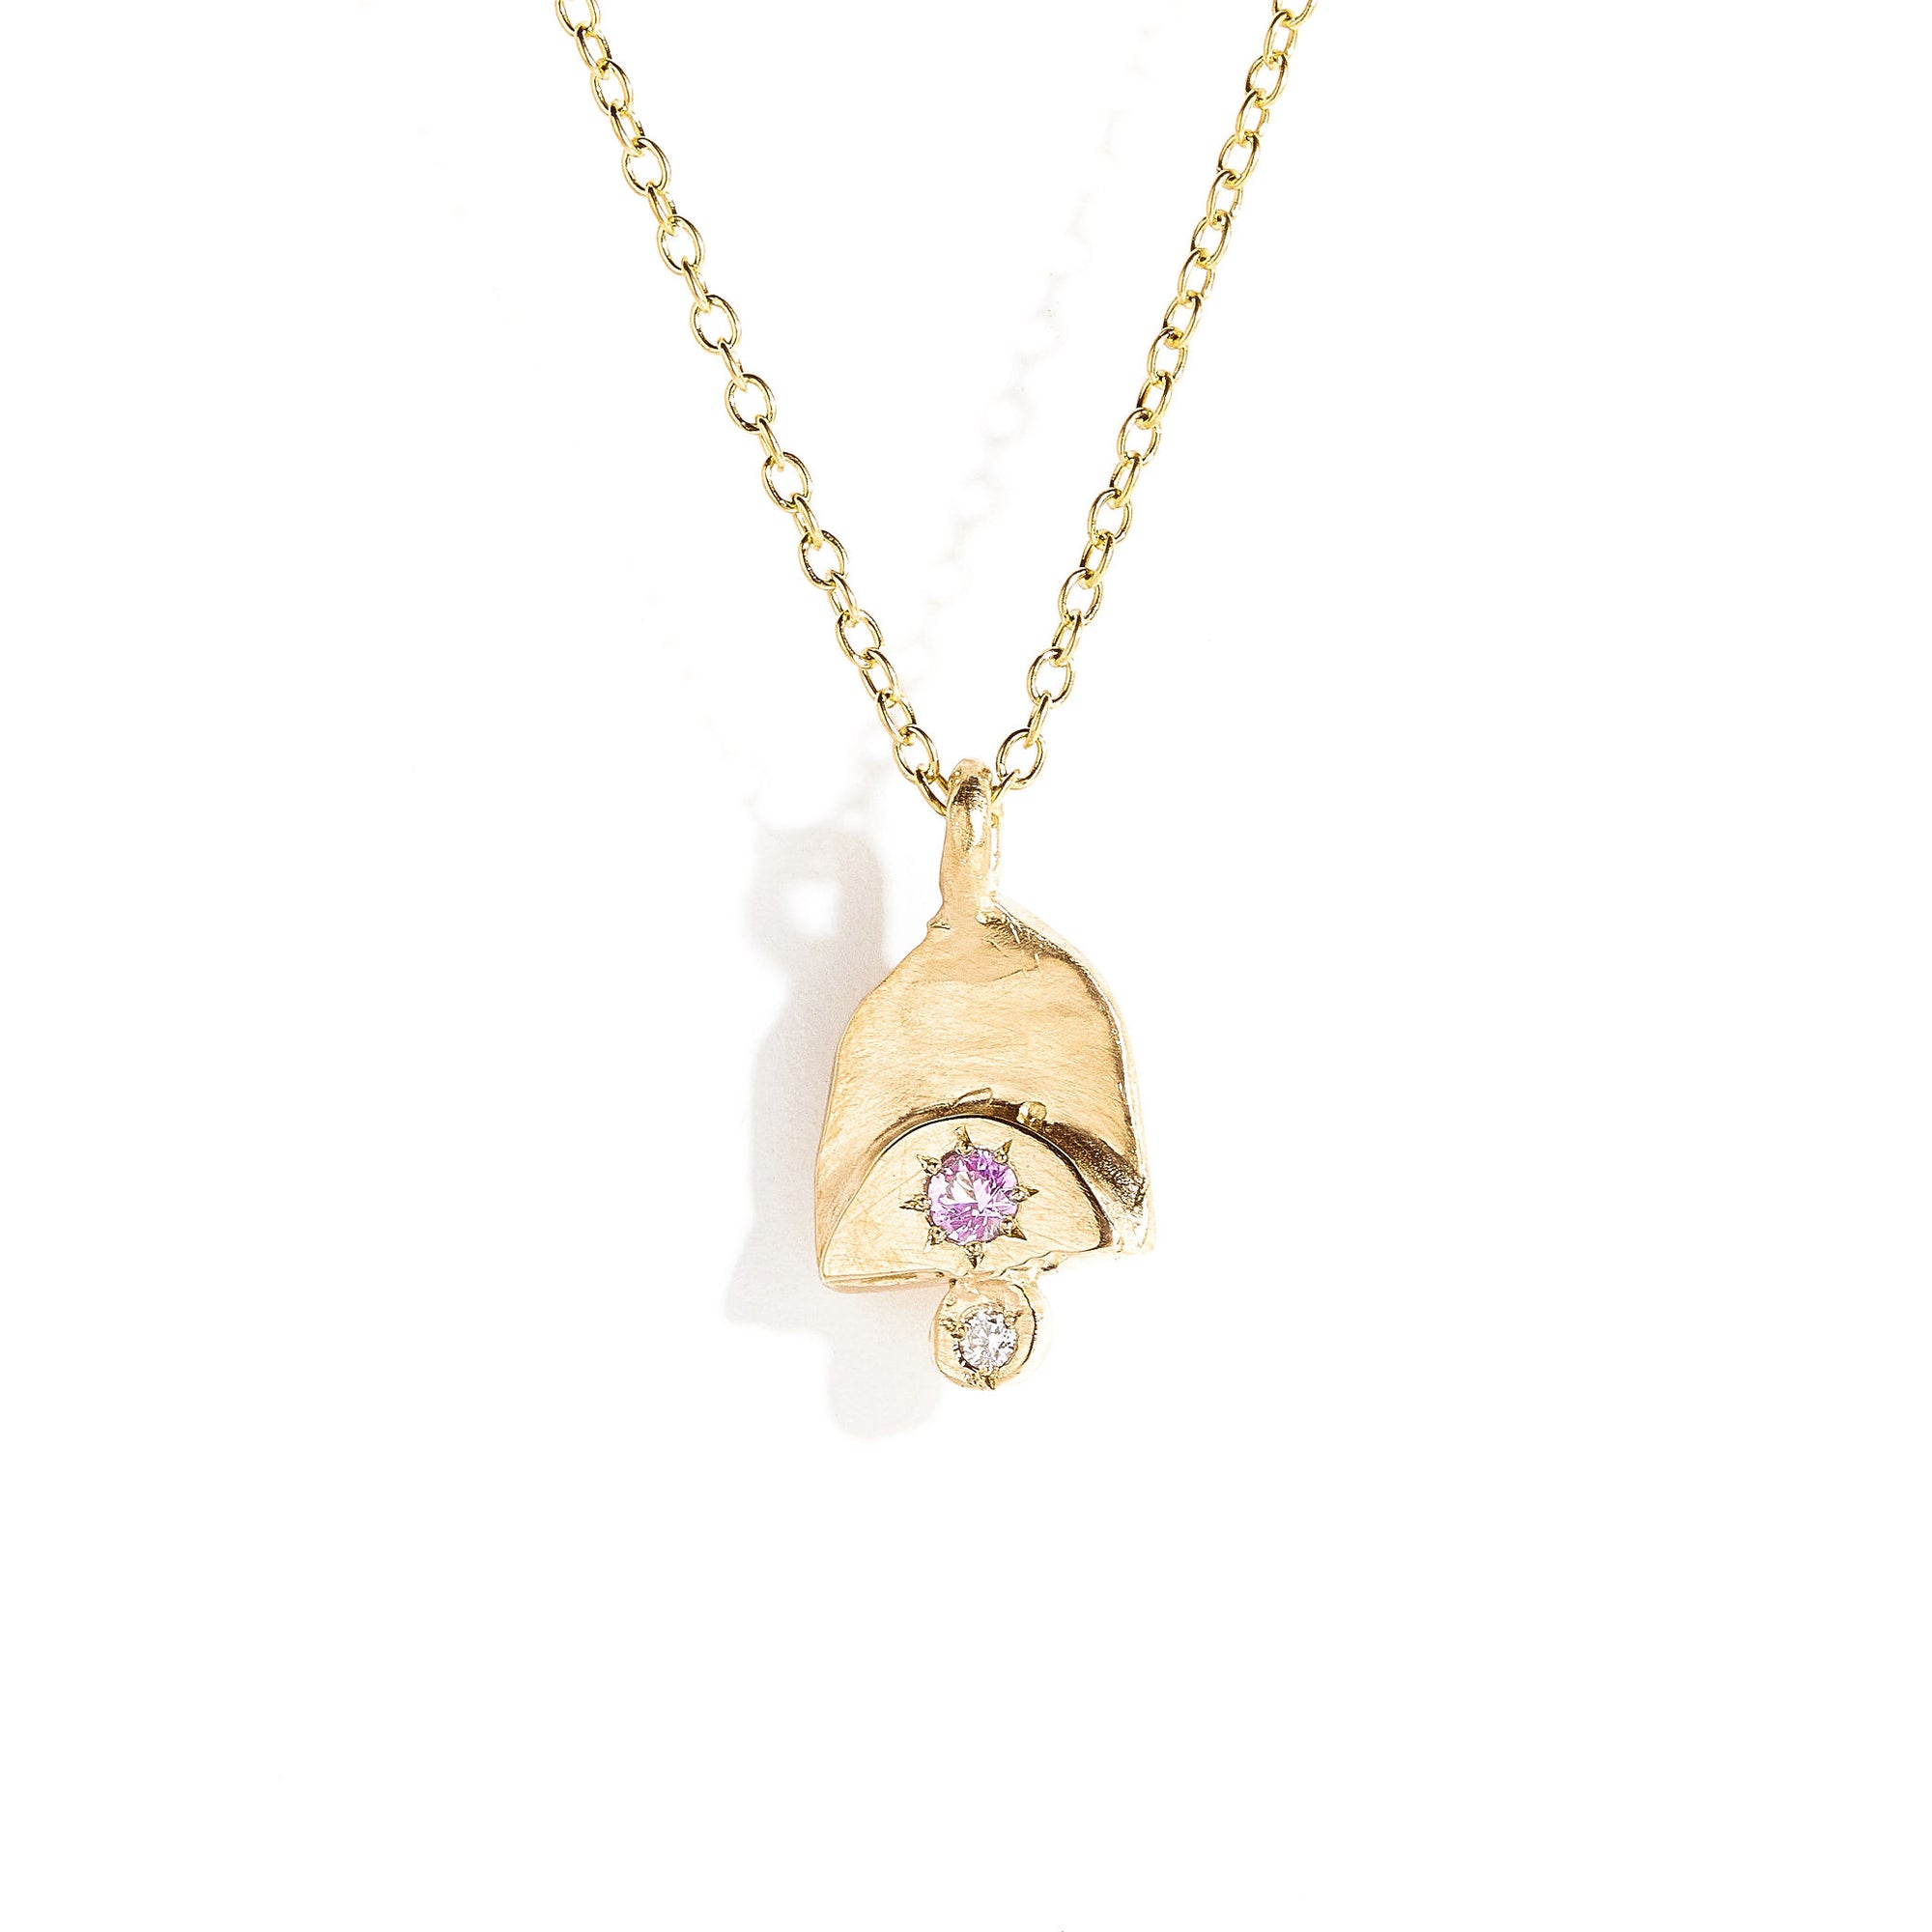 Pink sapphire and white diamond pendant in 9 carat yellow gold. 